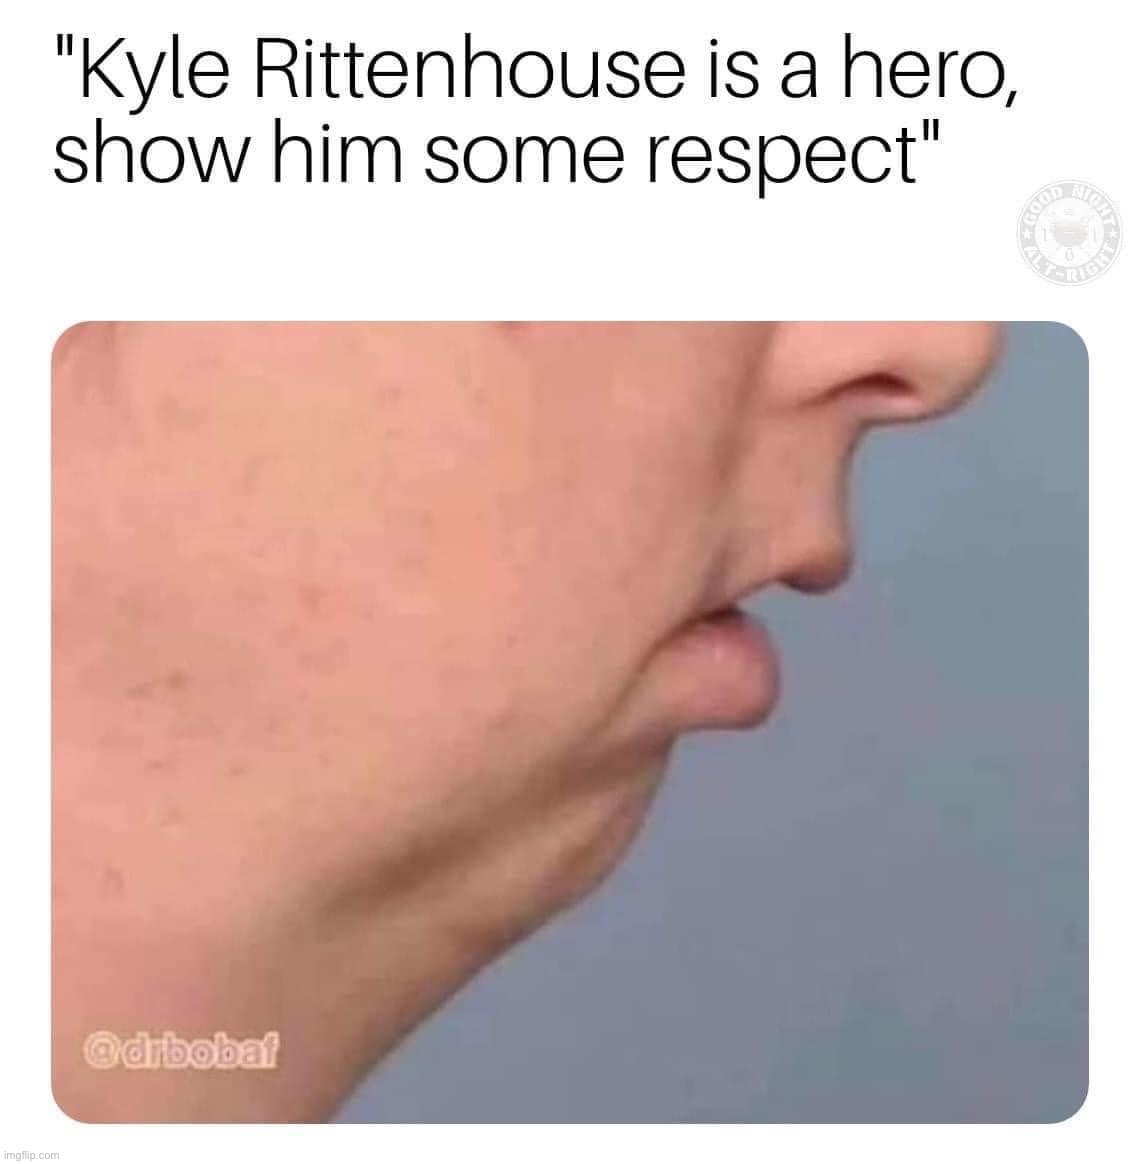 based chin, maga | image tagged in kyle rittenhouse is a hero,kyle rittenhouse,is,a,hero,maga | made w/ Imgflip meme maker